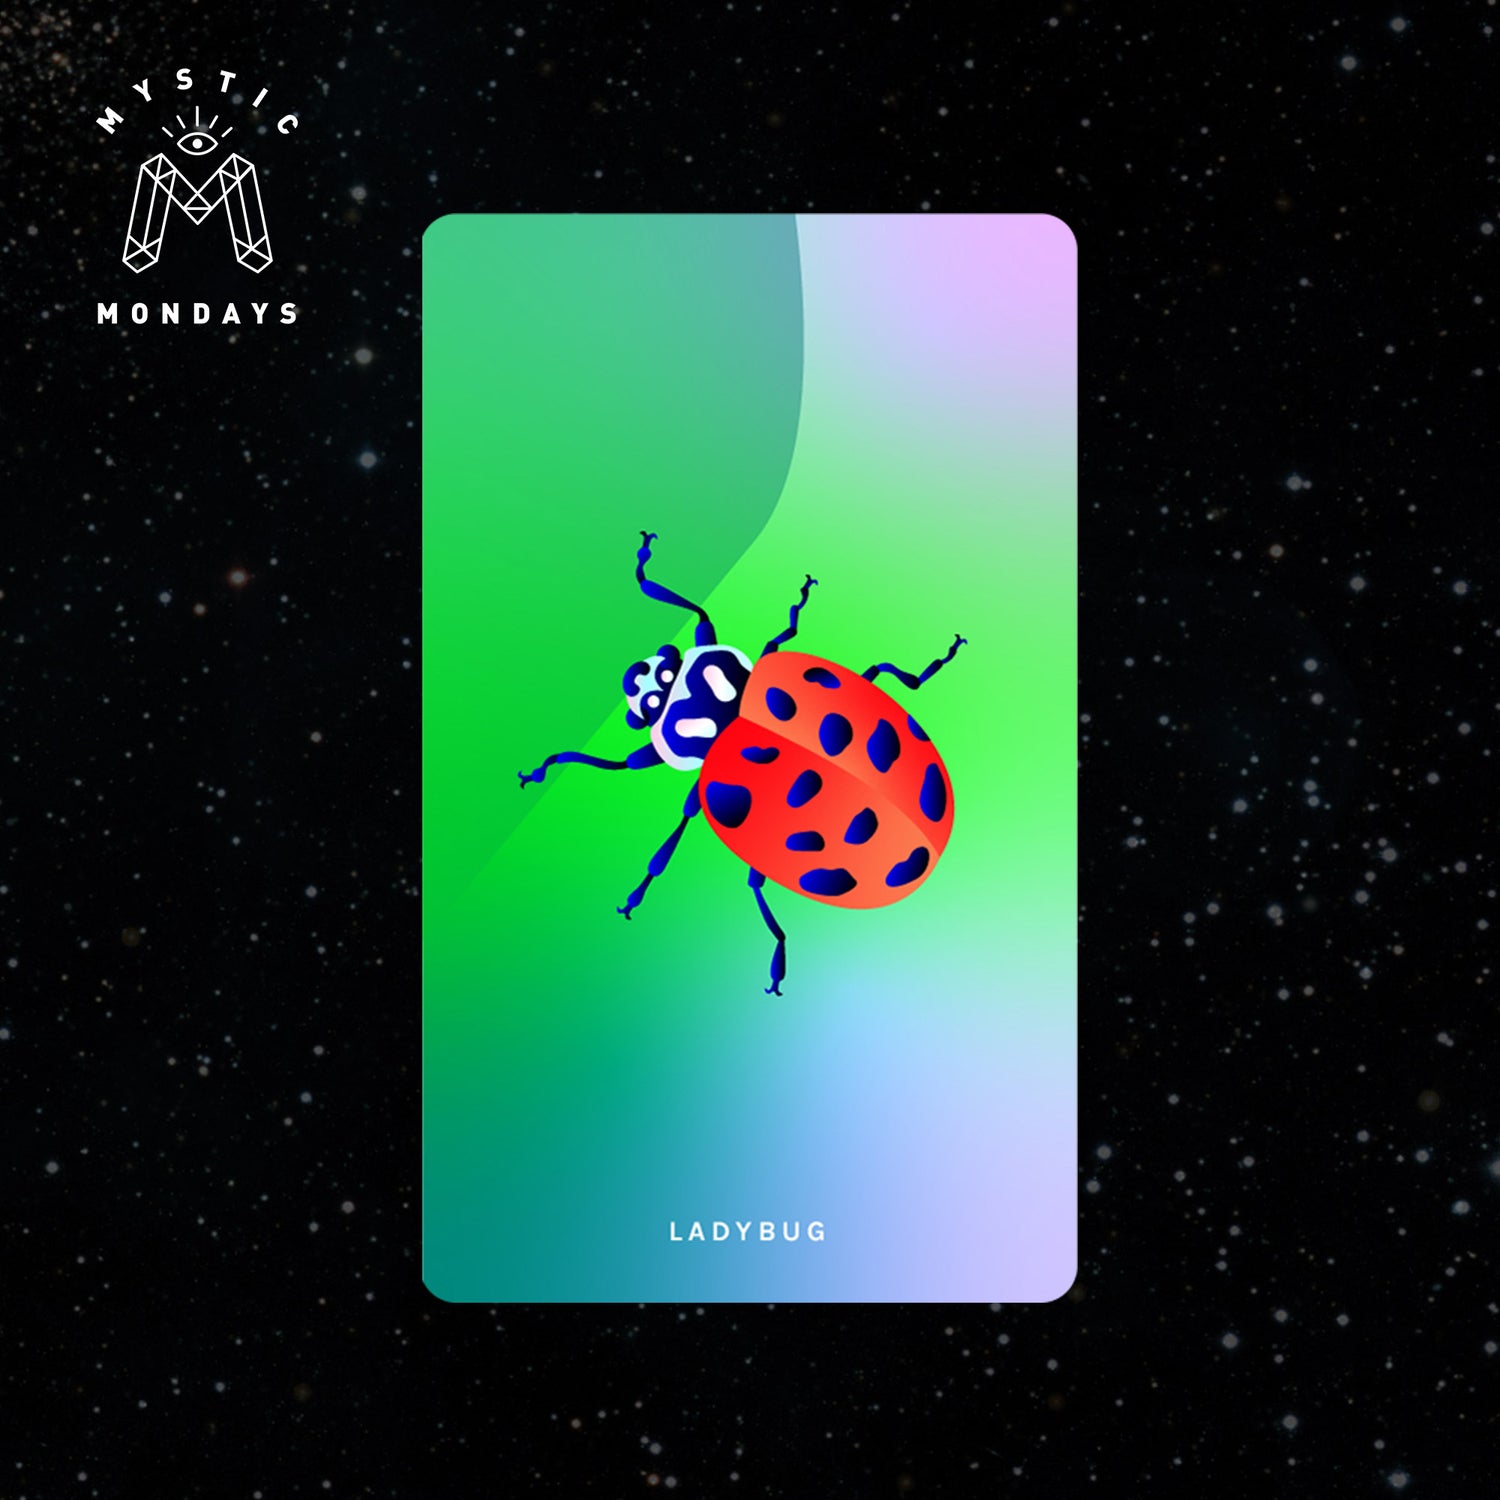 Ladybug Cosmic Creatures Card Cheat Sheet Reference Guide